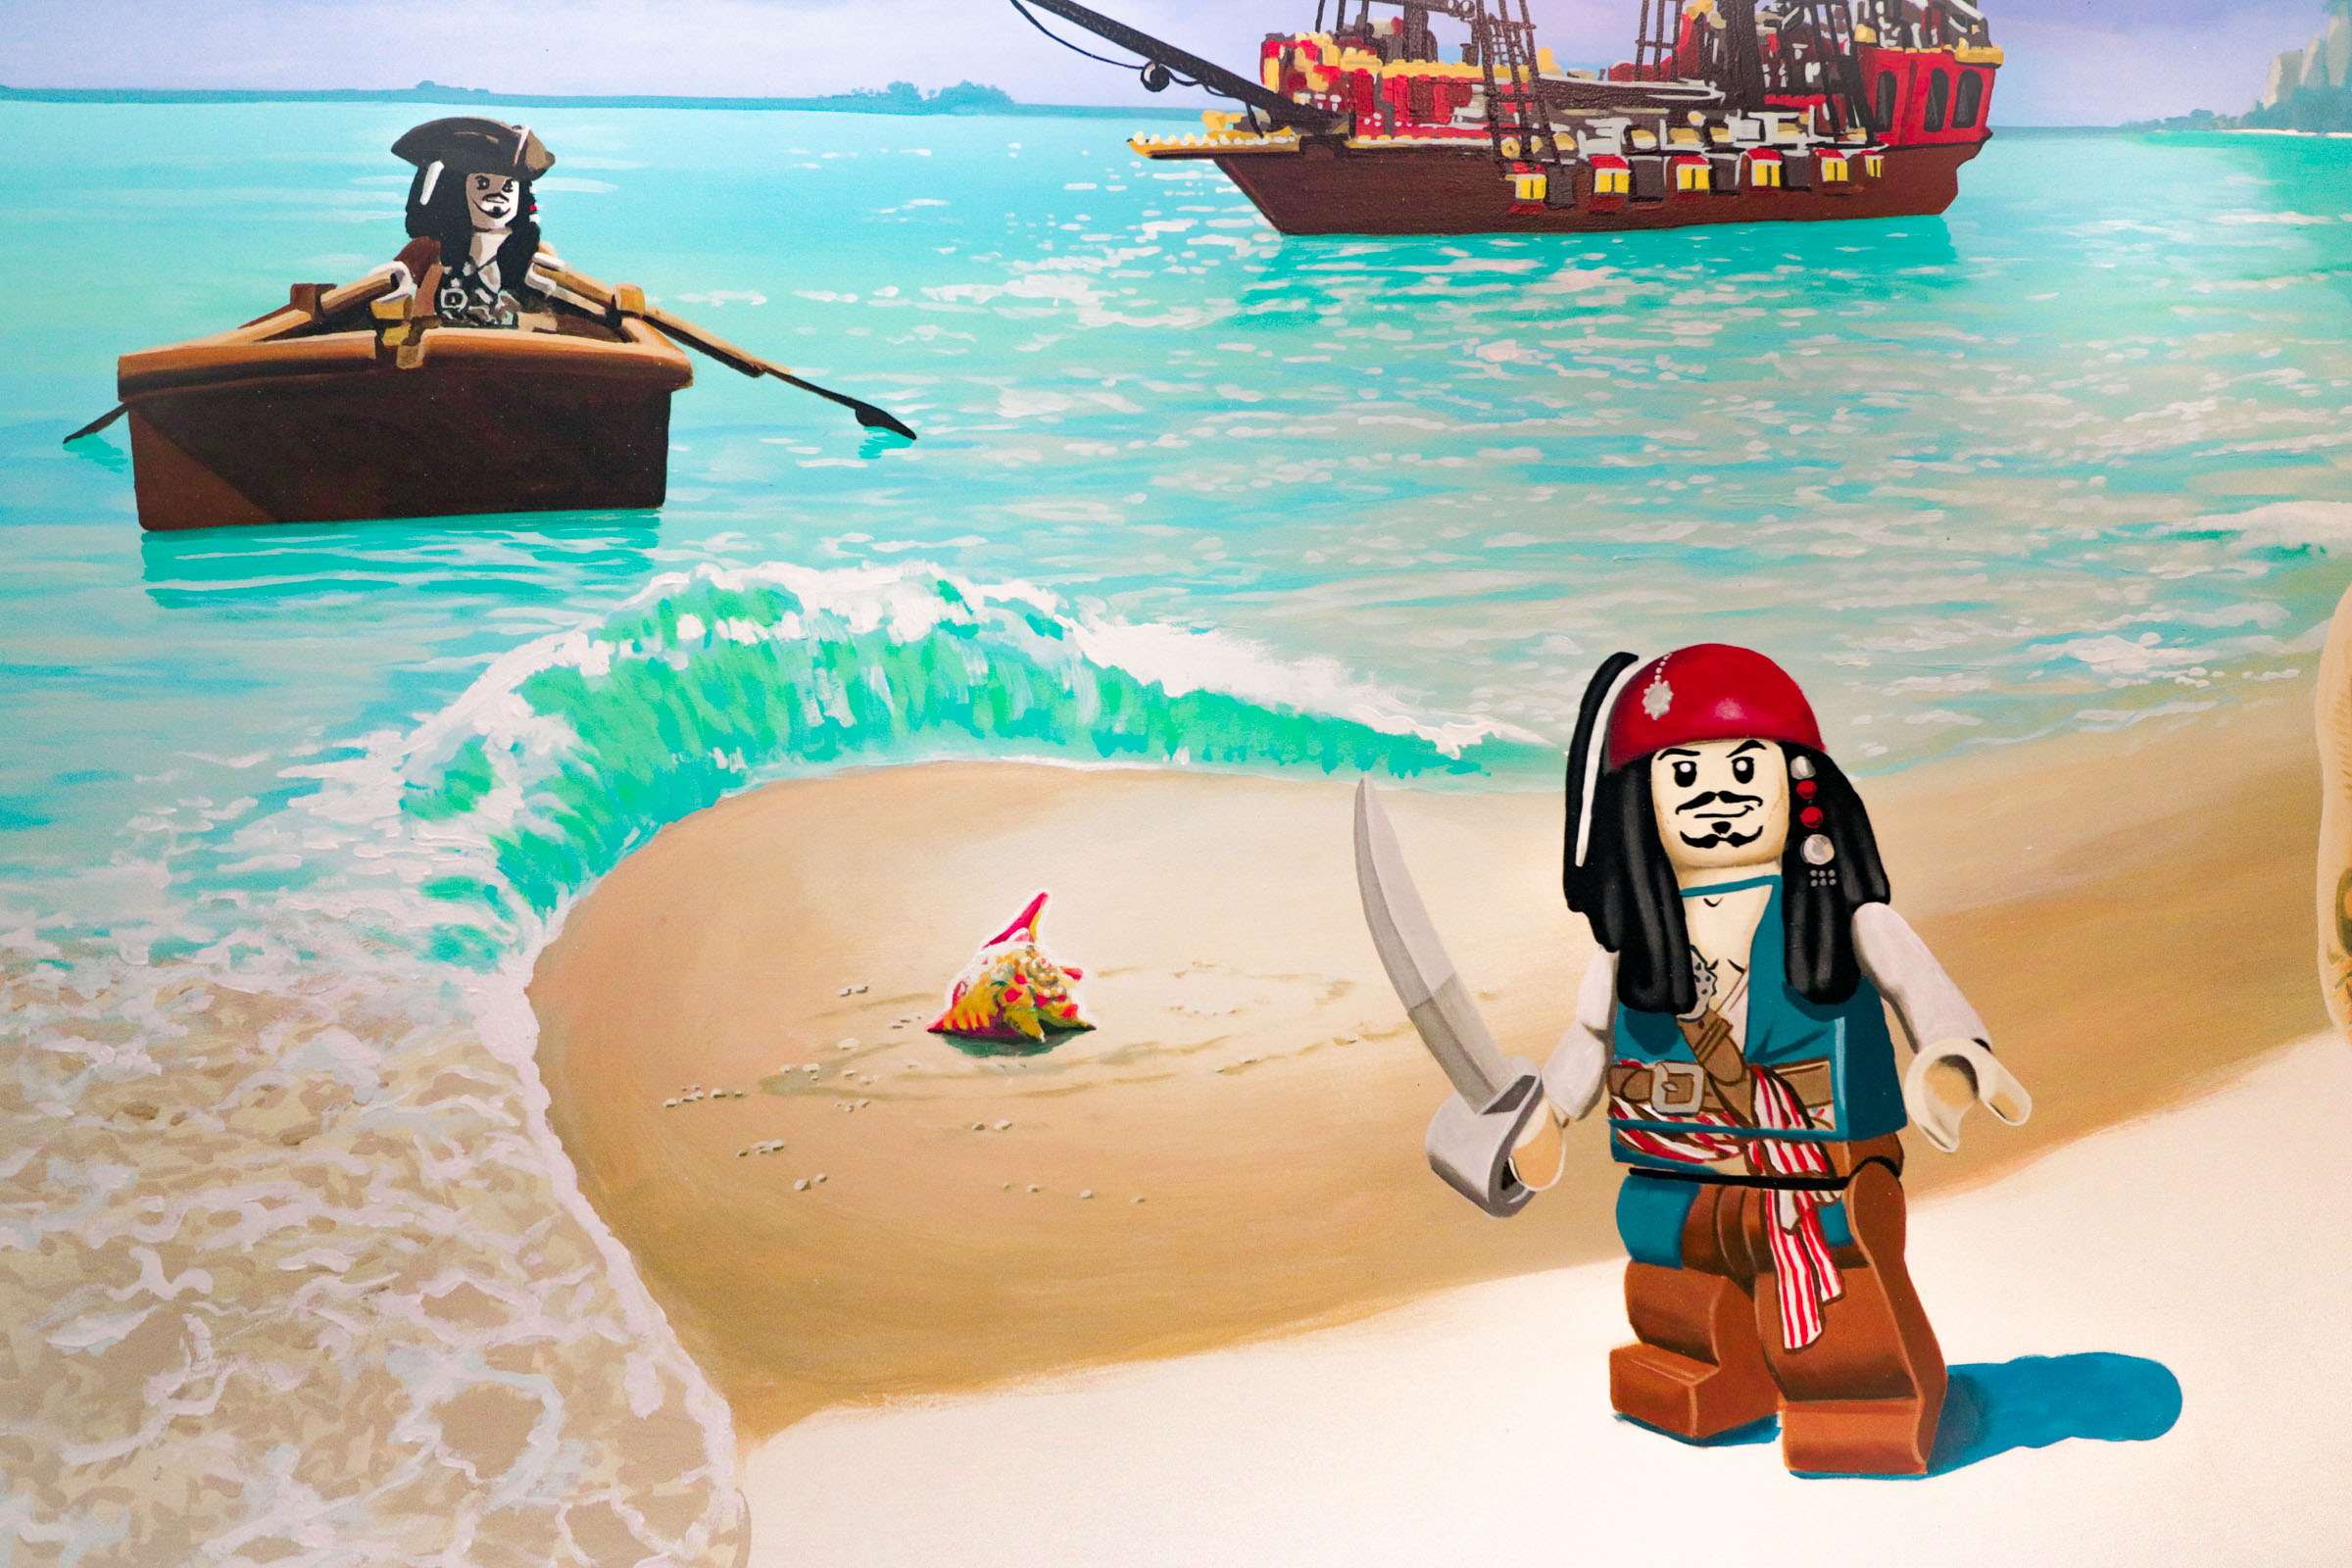 Lego Jack Sparrow from Lego Pirates of the Caribbean meets Moana in kid's mural